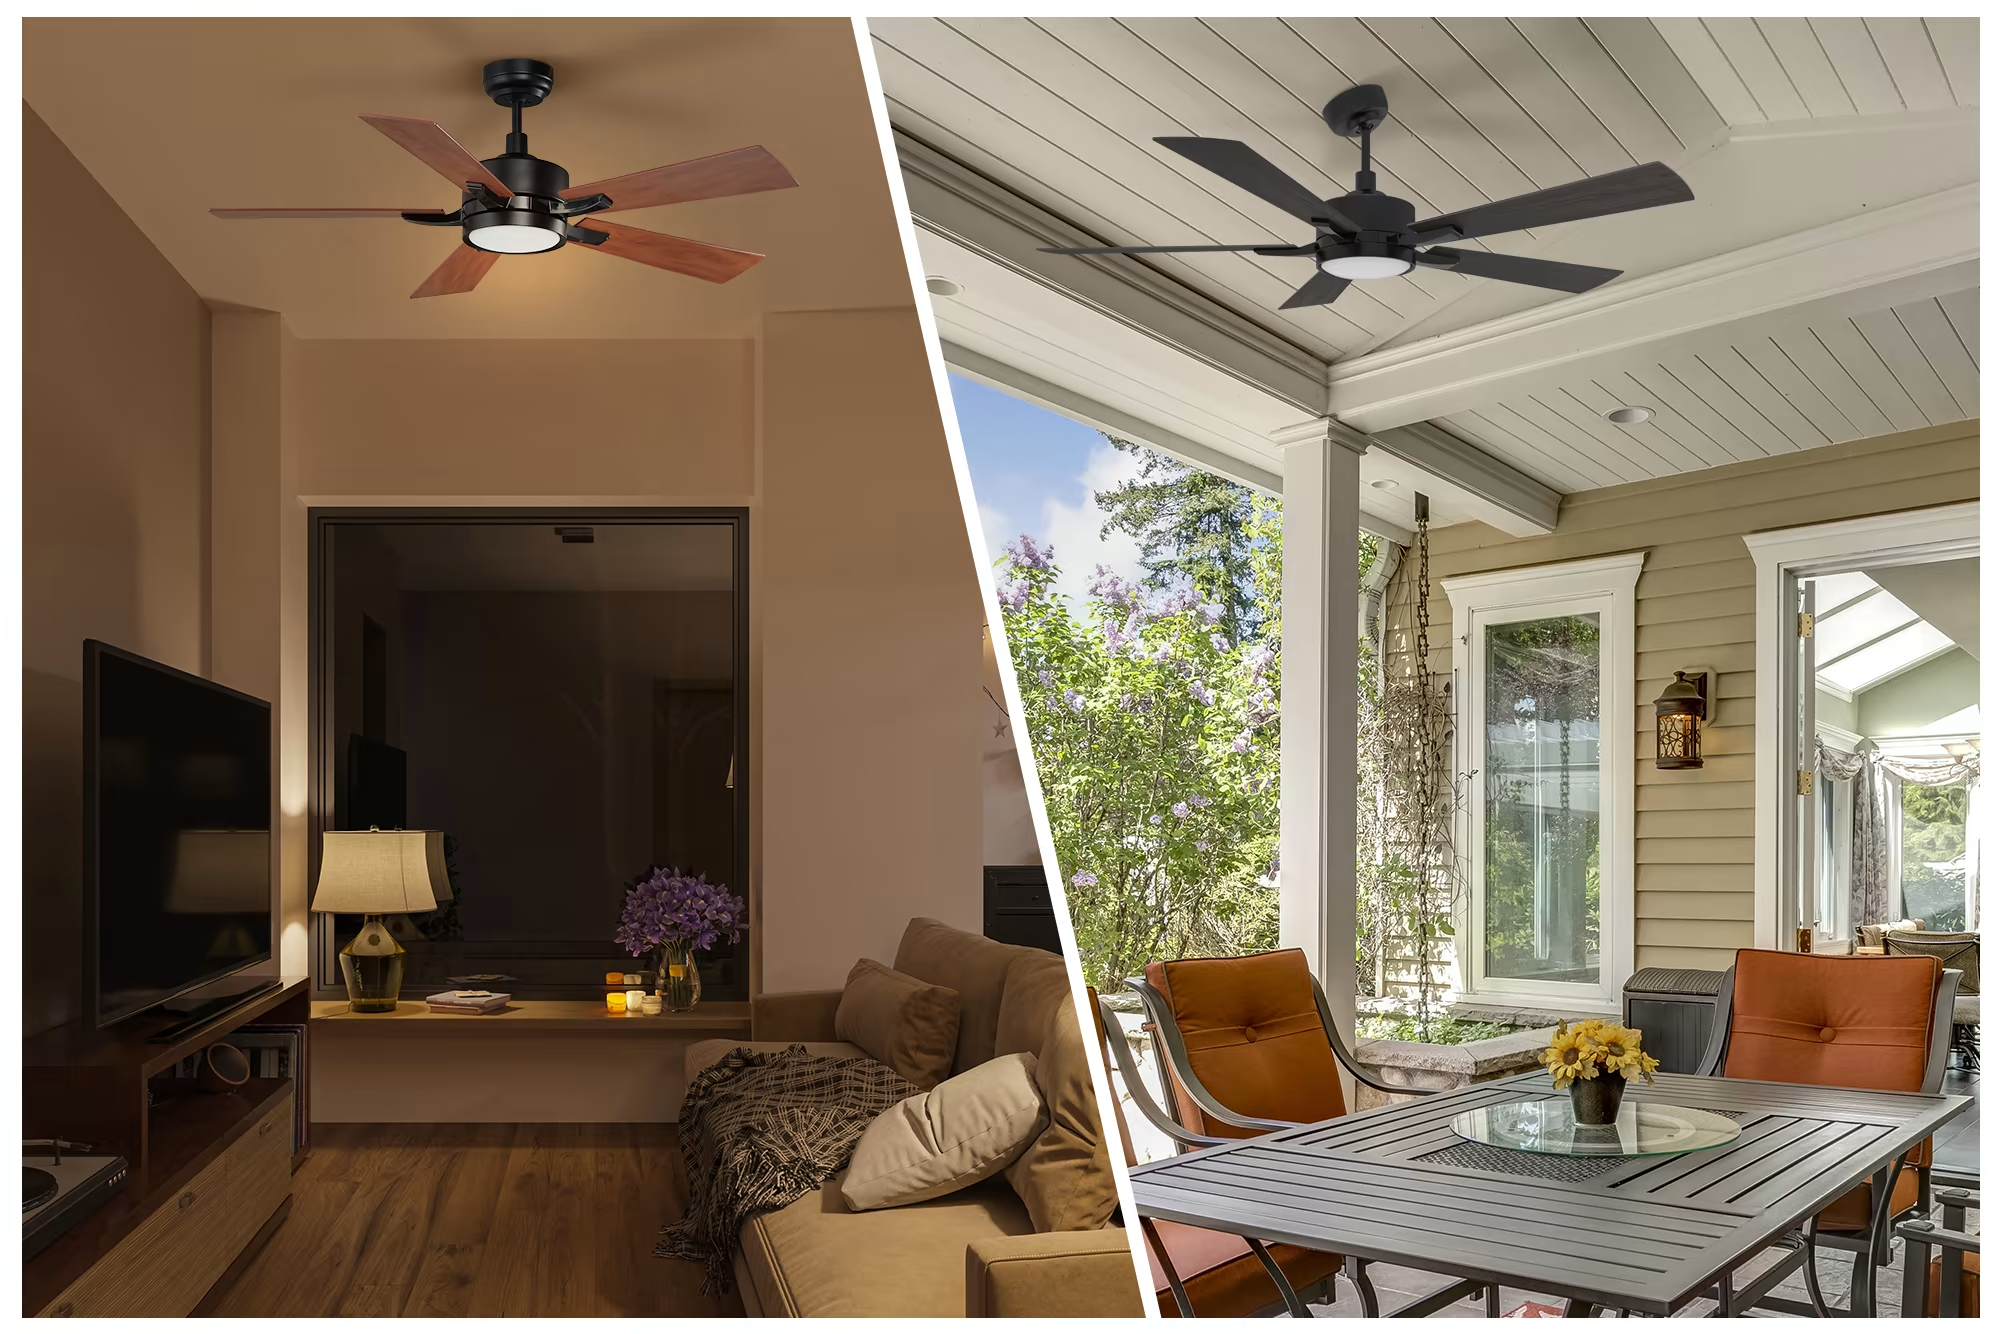 Carro-Smafan-Apex-Indoor-Outdoor-Smart-Ceiling-Fan-with-Remote-Slope-Flat-Angled-M_ount-Extension-Downrod_faeavb